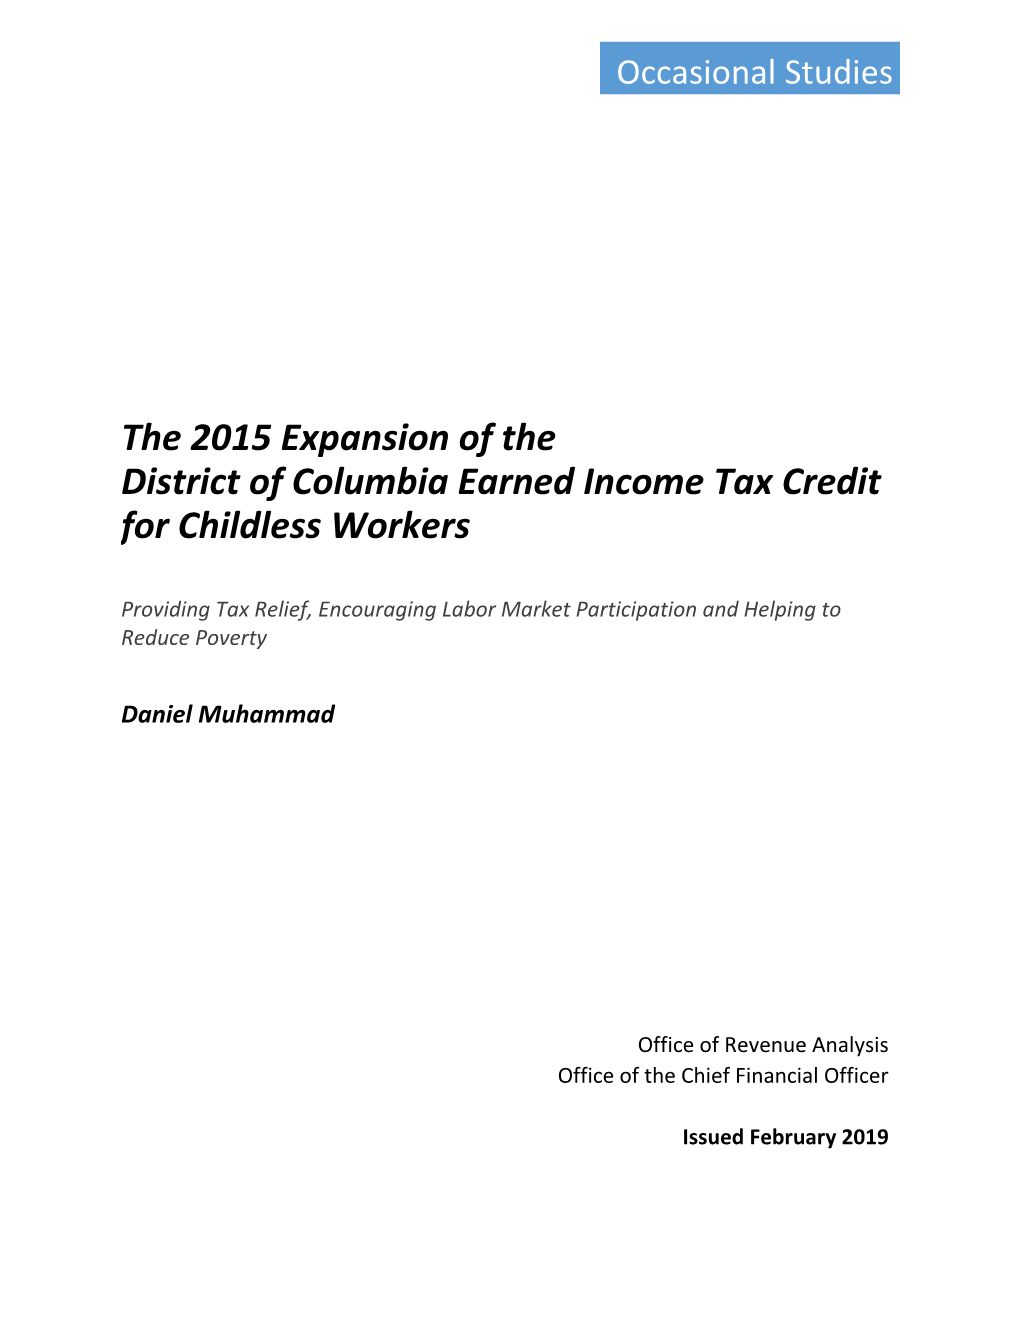 The 2015 Expansion of the DC Earned Income Tax Credit For